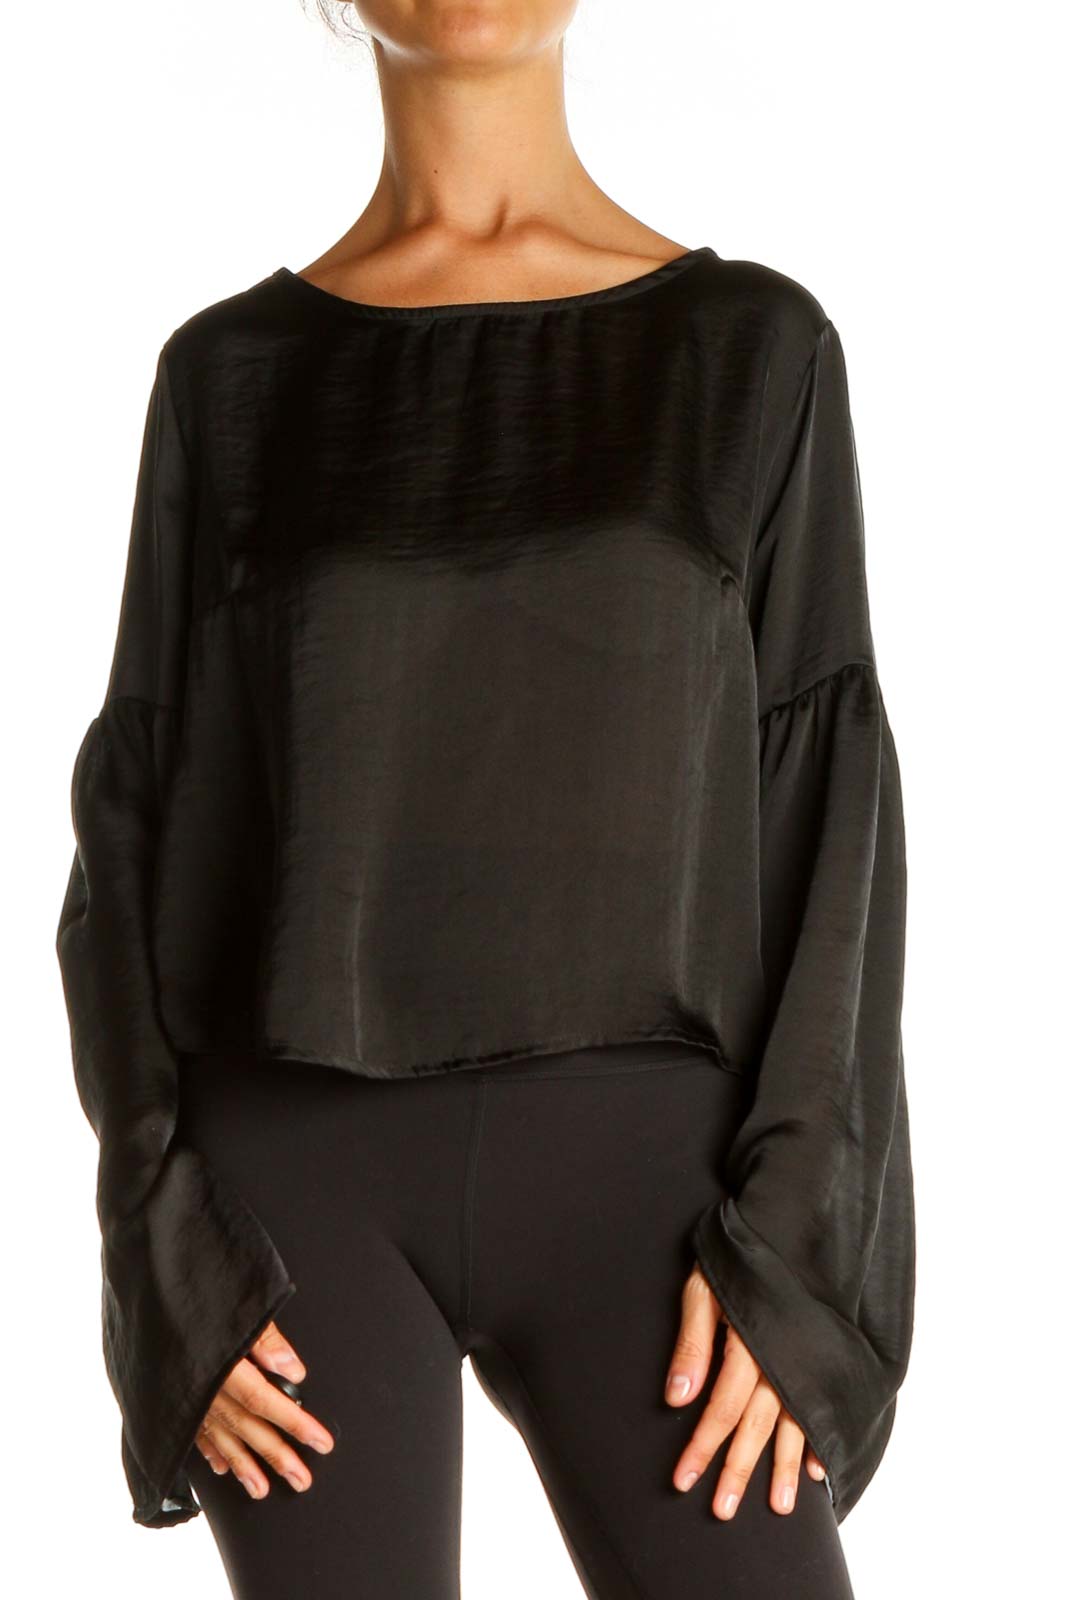 Black Solid All Day Wear Blouse Front